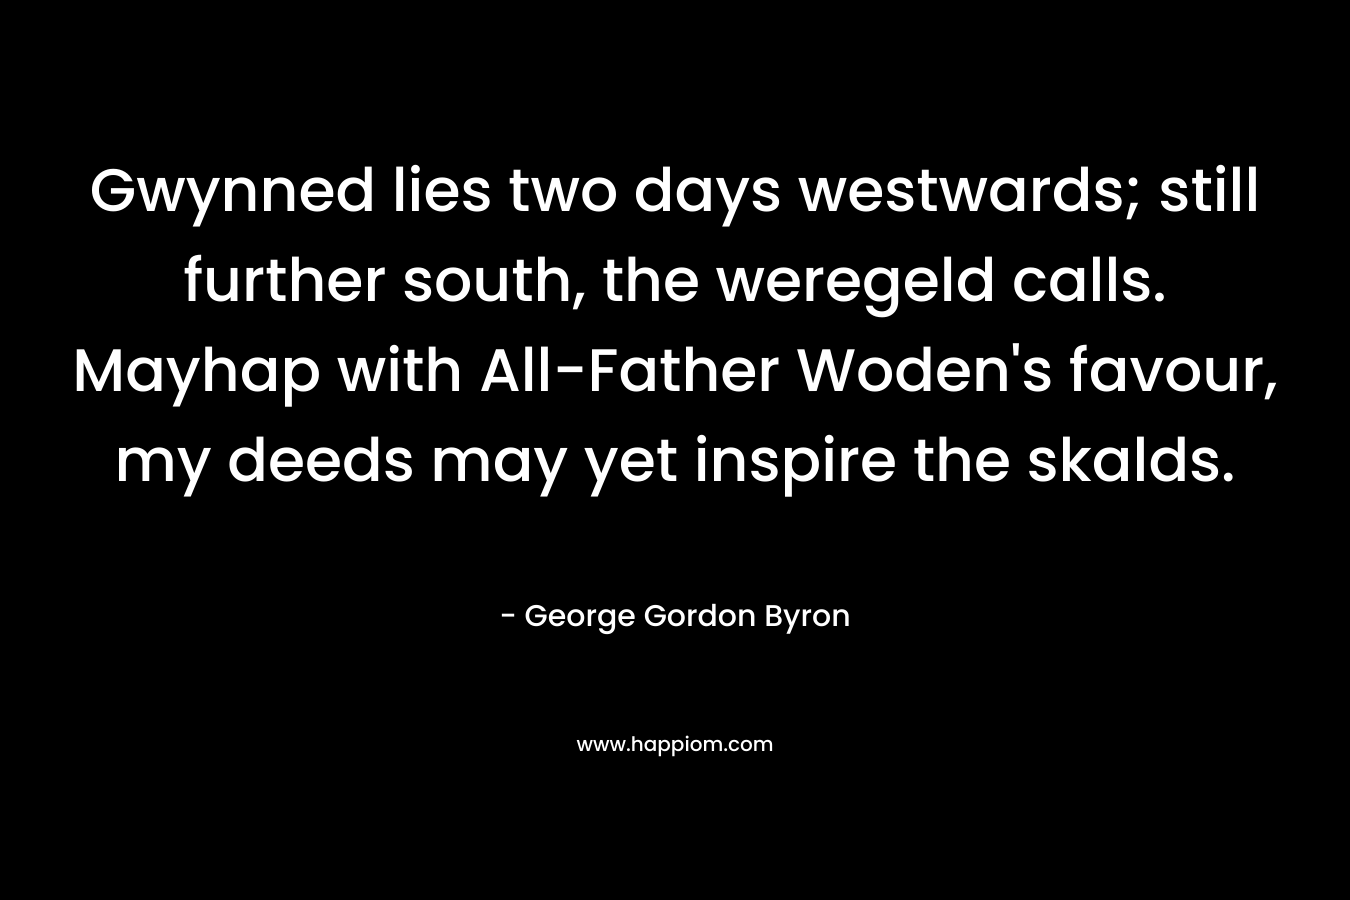 Gwynned lies two days westwards; still further south, the weregeld calls. Mayhap with All-Father Woden's favour, my deeds may yet inspire the skalds.